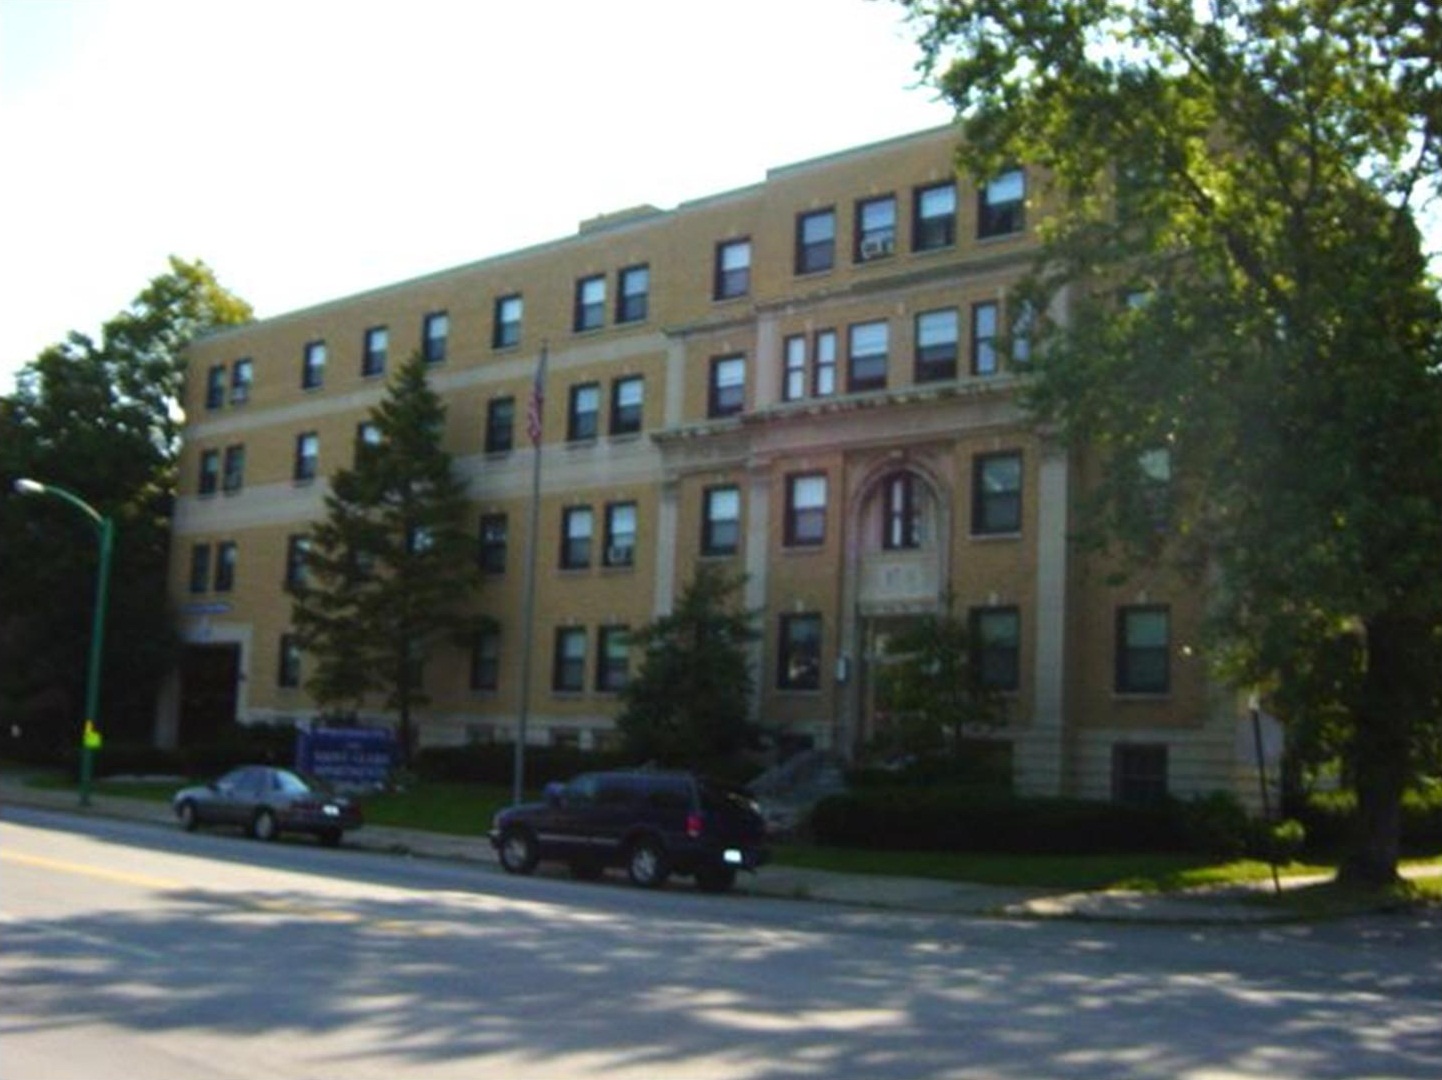 ST. CLARE APARTMENTS